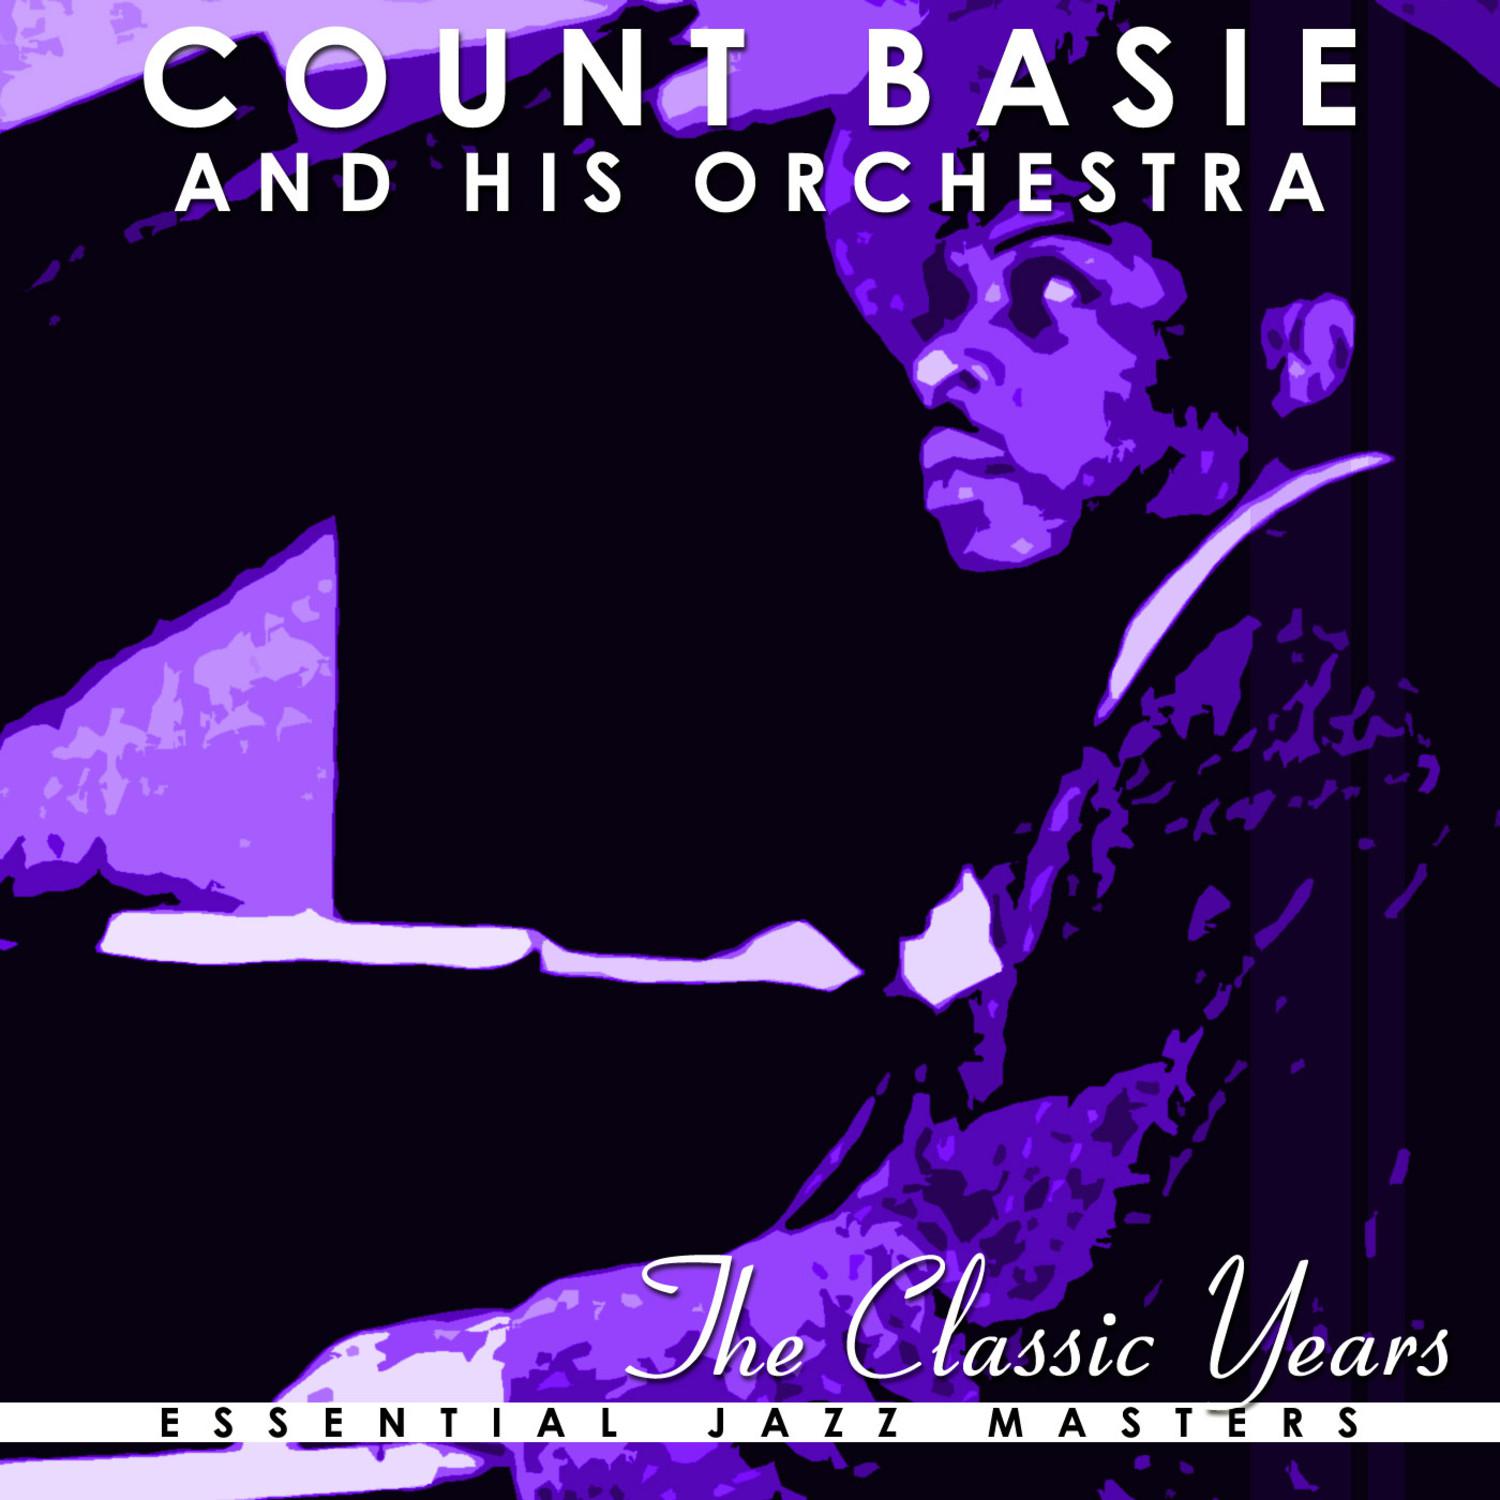 The Classic Years Of Count Basie